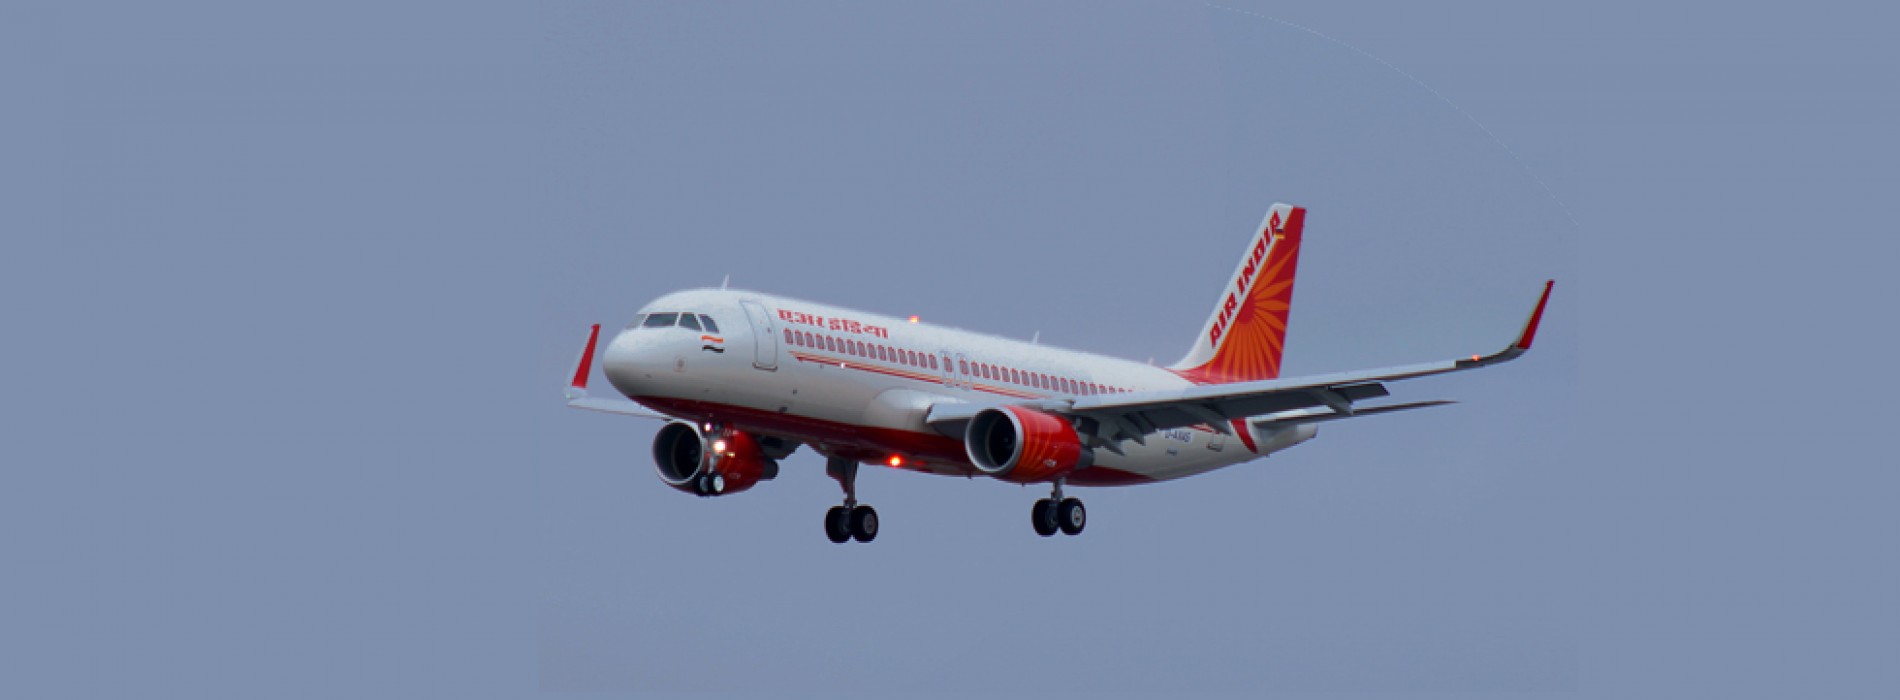 Air India tells staff to file police complaints against unruly passengers, mulls no-fly list